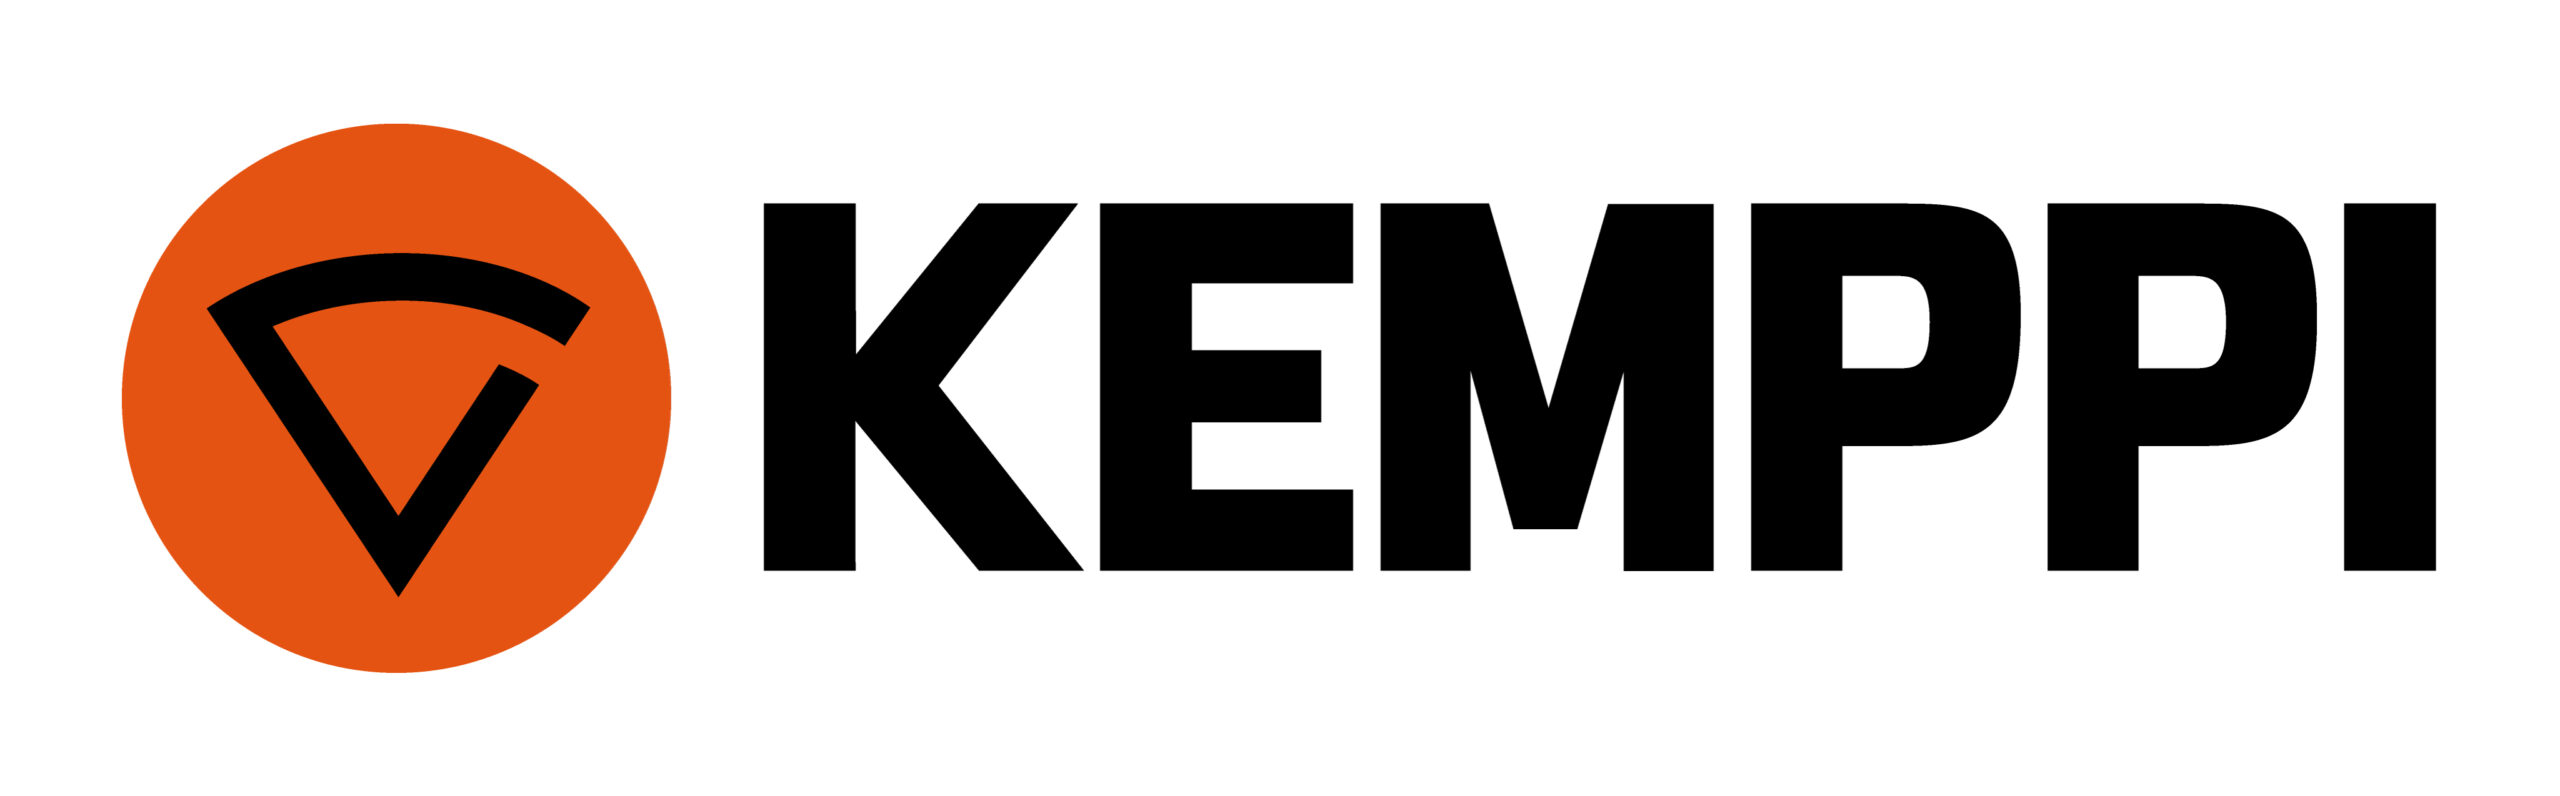 Kemppi is the design leader of the arc welding industry, committed to boosting the quality and productivity of welding by continuous development of the welding arc. Working in partnership with Olympus Technologies.